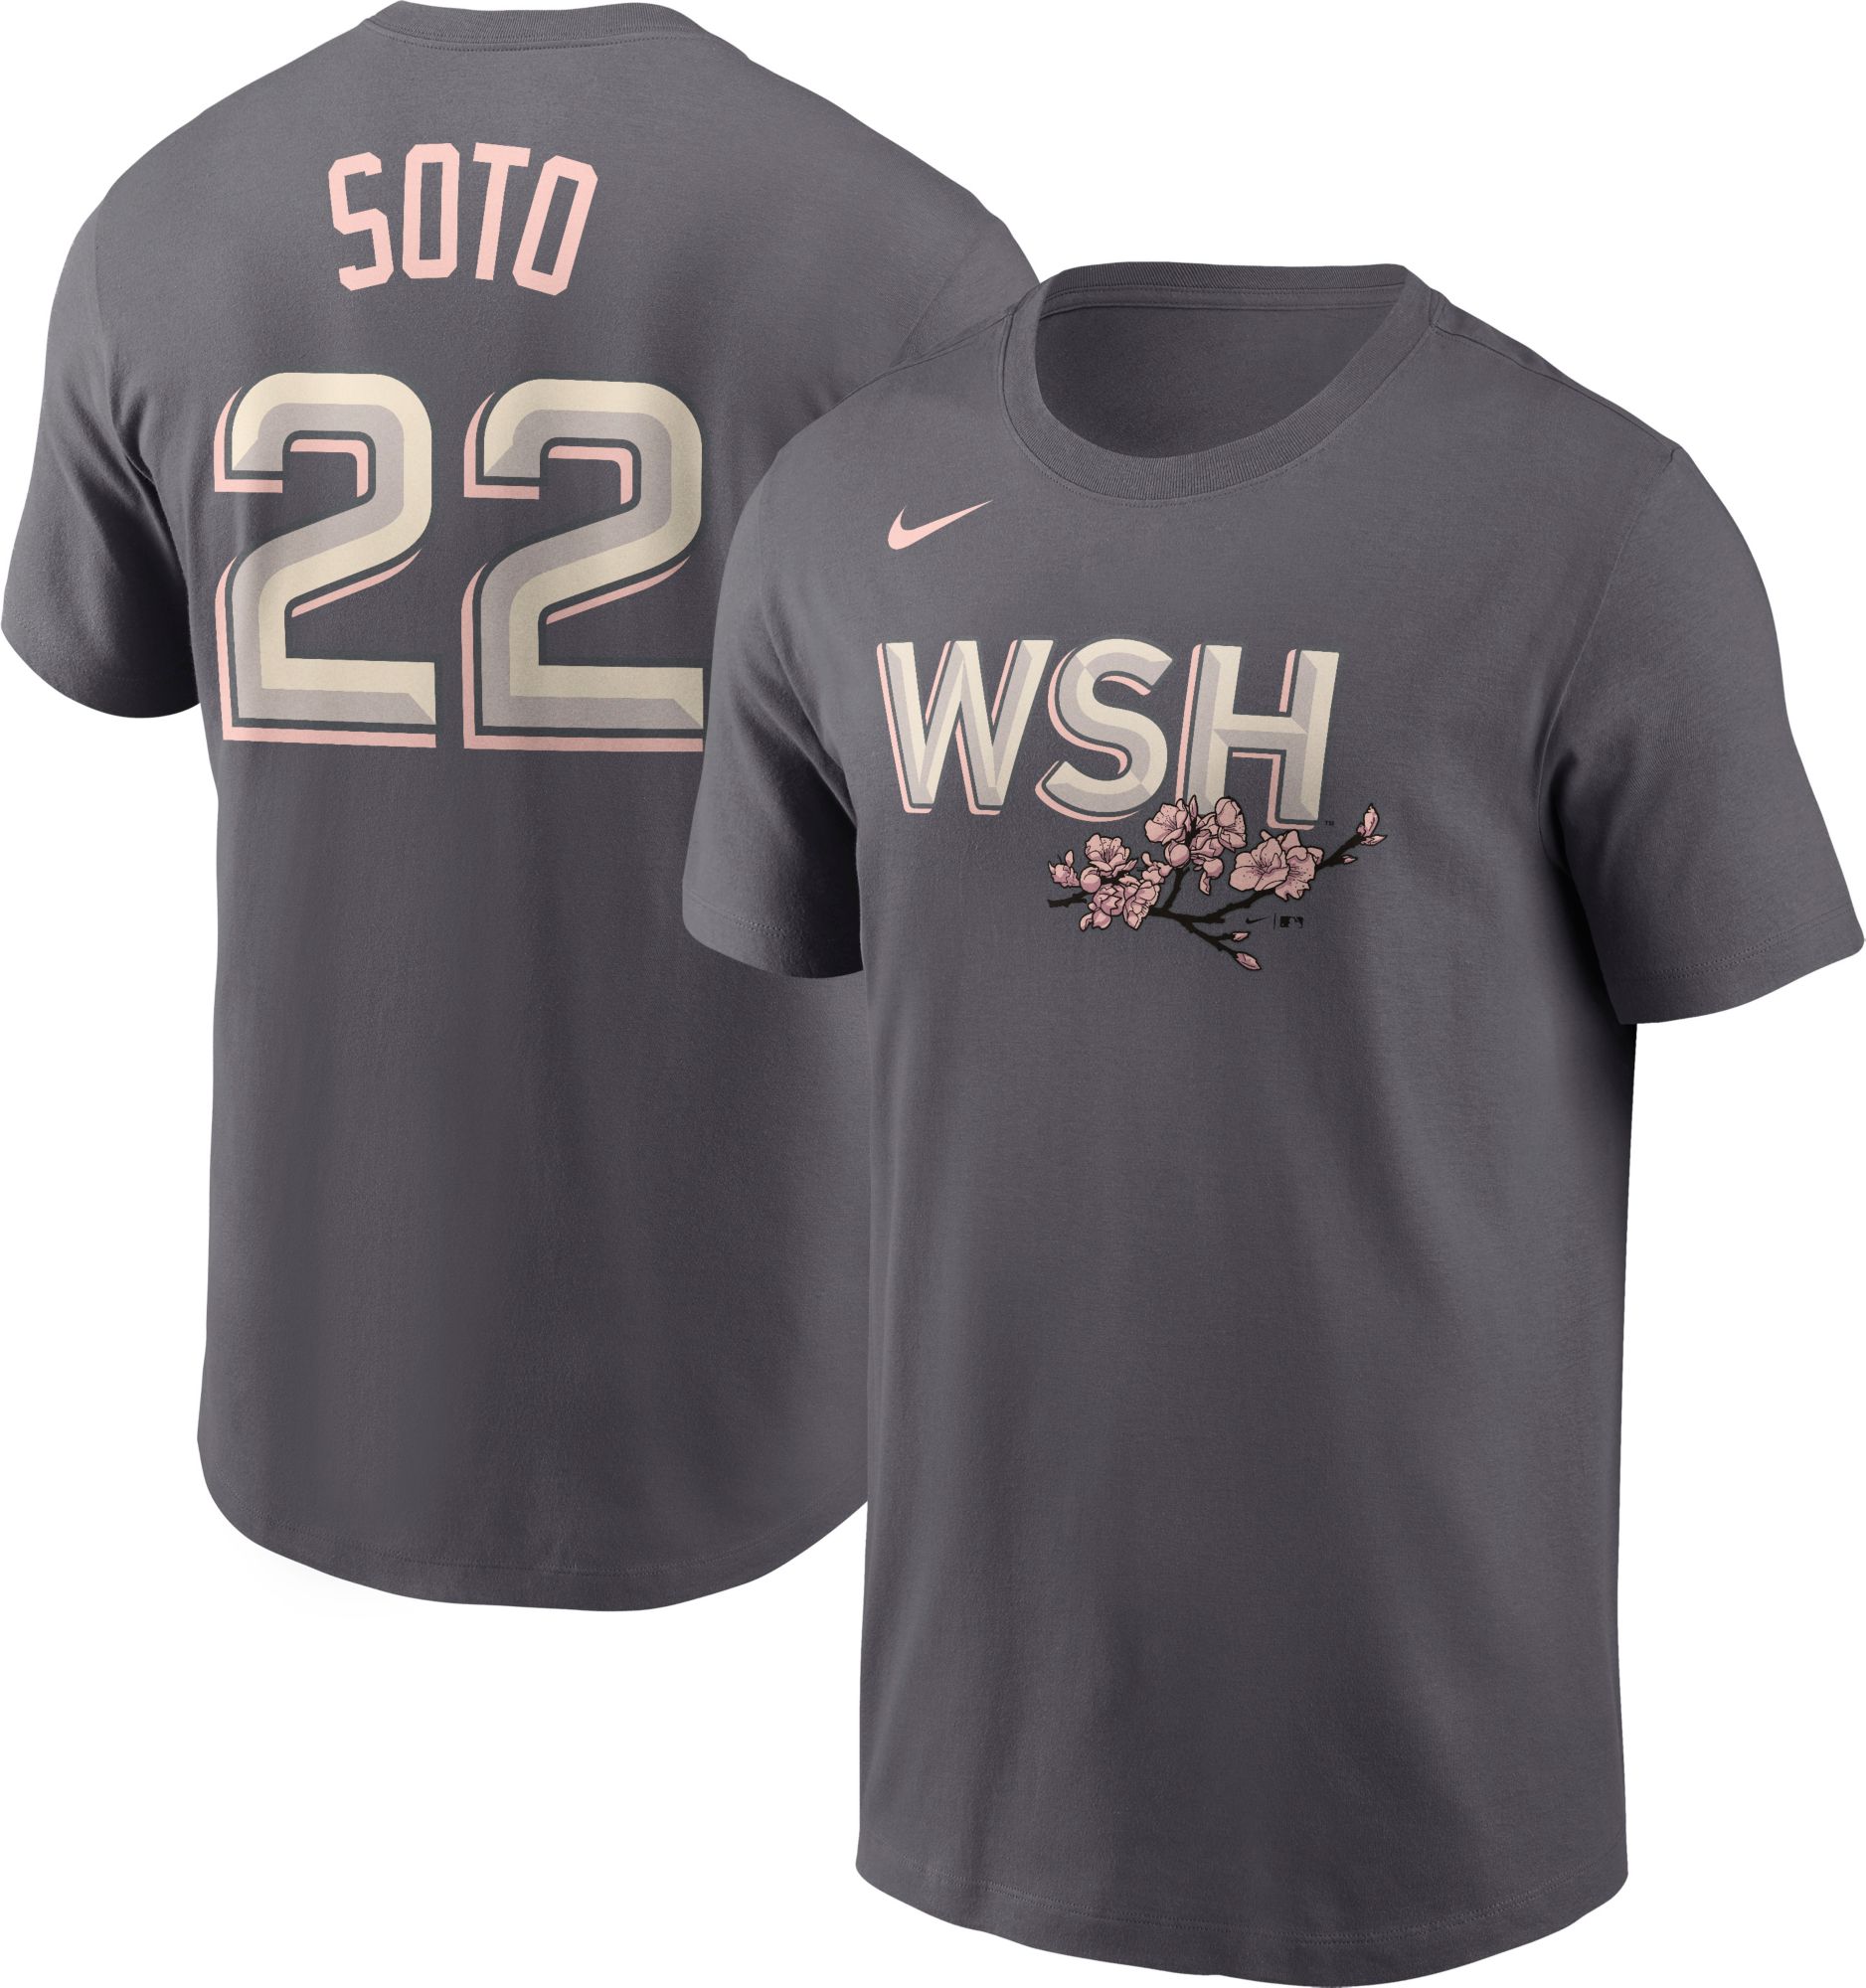 Juan Soto Jerseys & Gear  Curbside Pickup Available at DICK'S